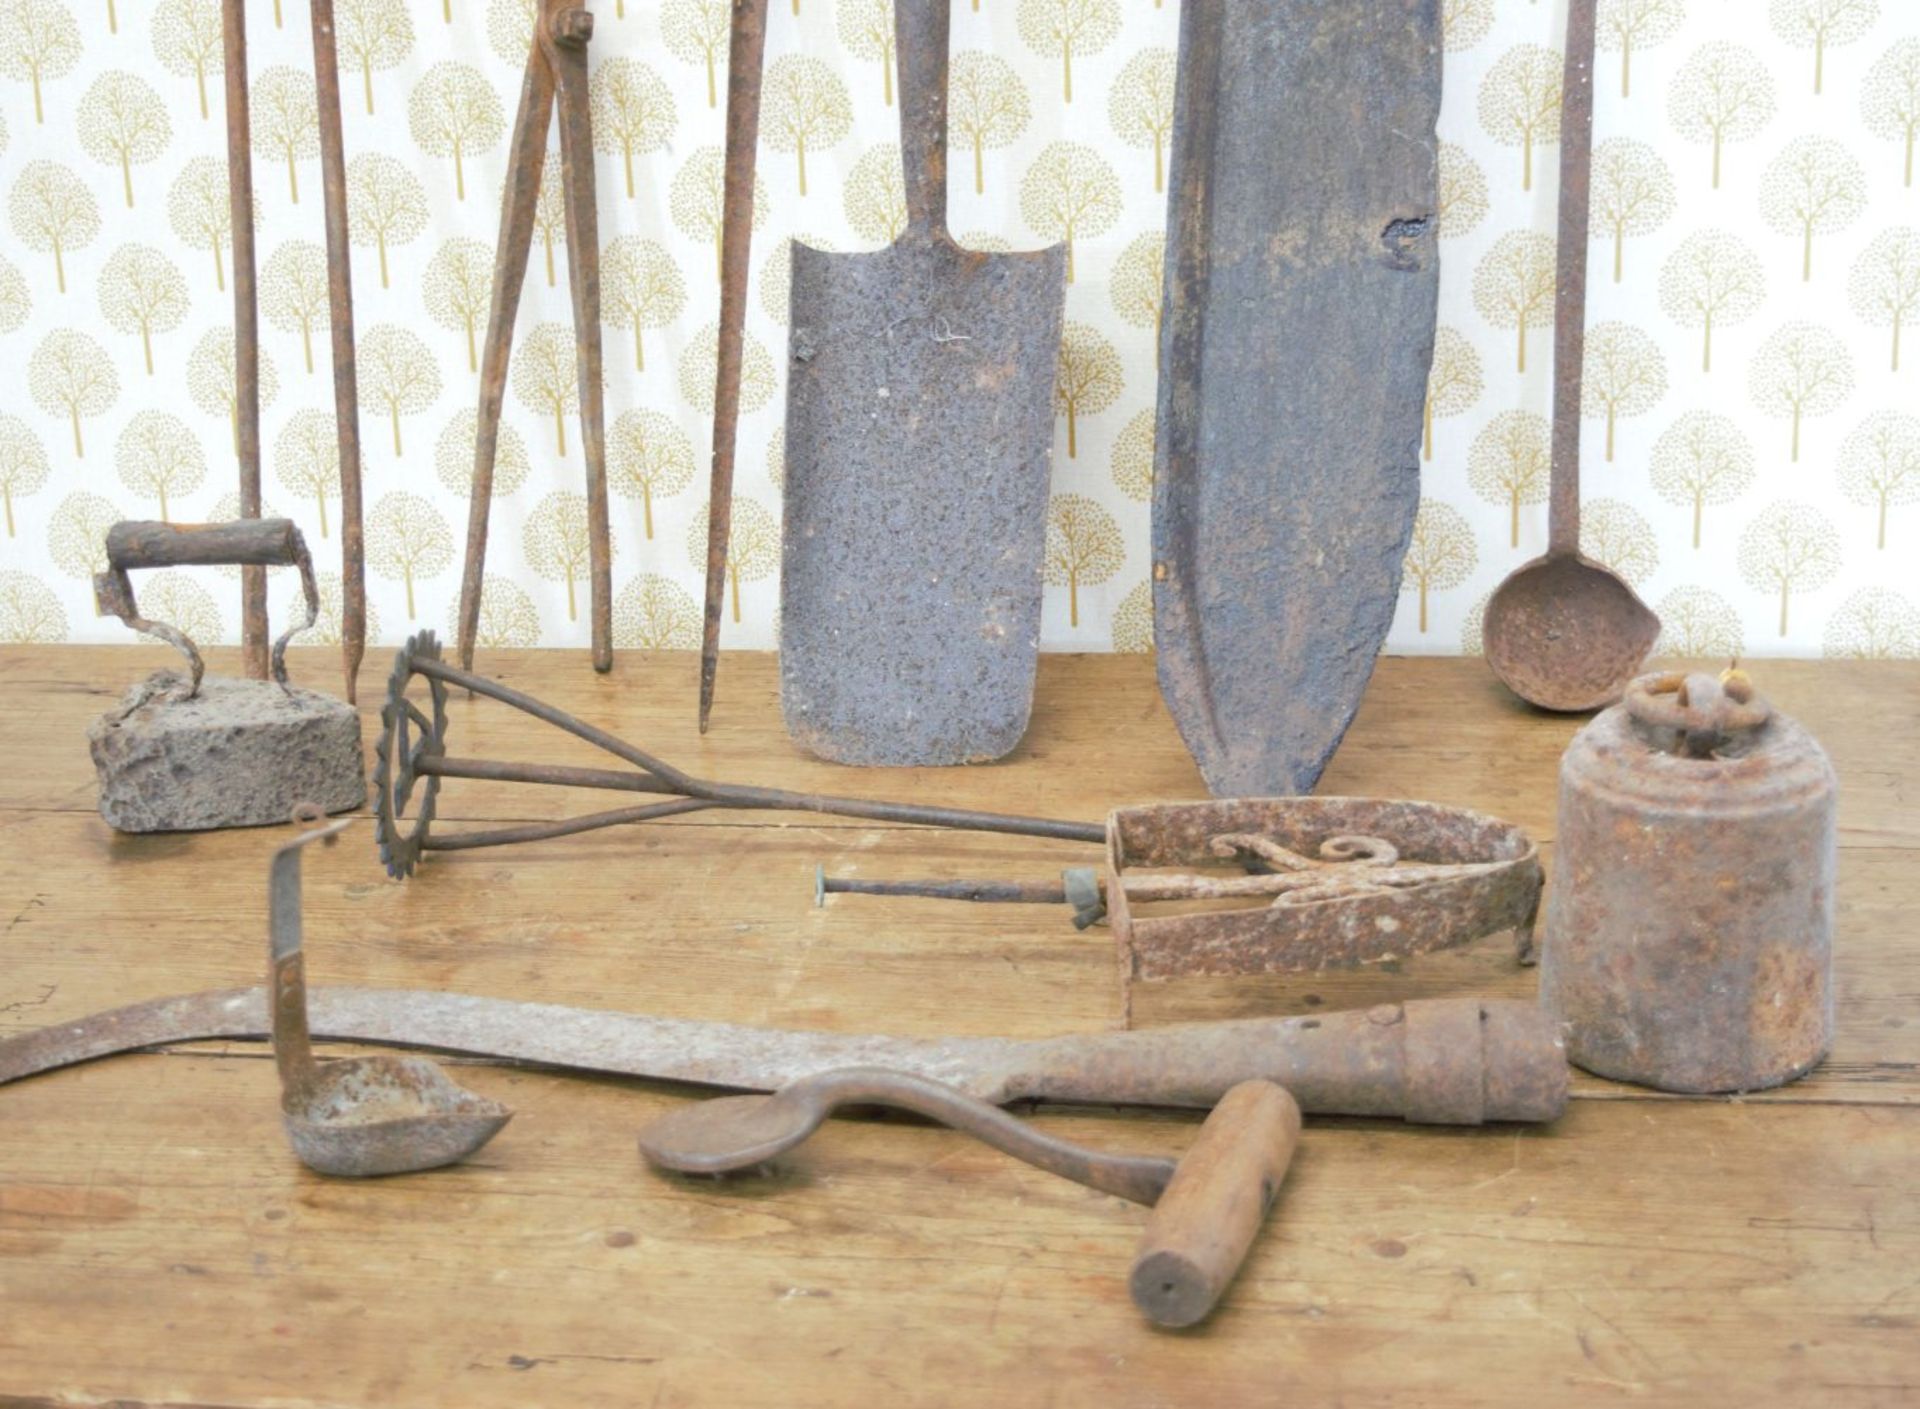 COLLECTION OF EARLY IRON TOOLS - Image 3 of 3